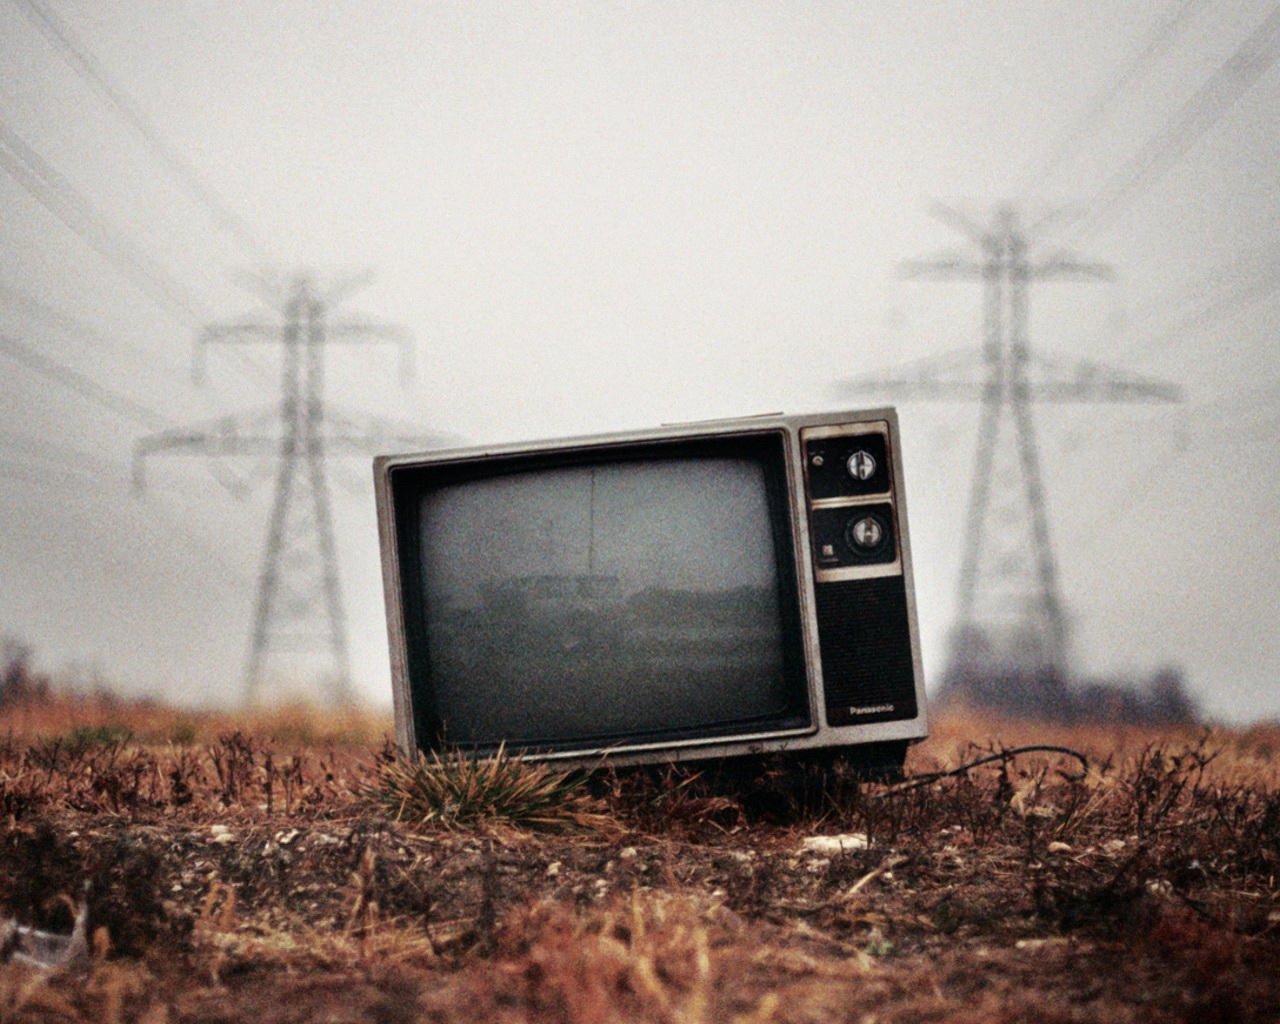 Amazing Old Tv Photography Art Wallpaper Top Quality HD Wallpapers Download Free Map Images Wallpaper [wallpaper376.blogspot.com]